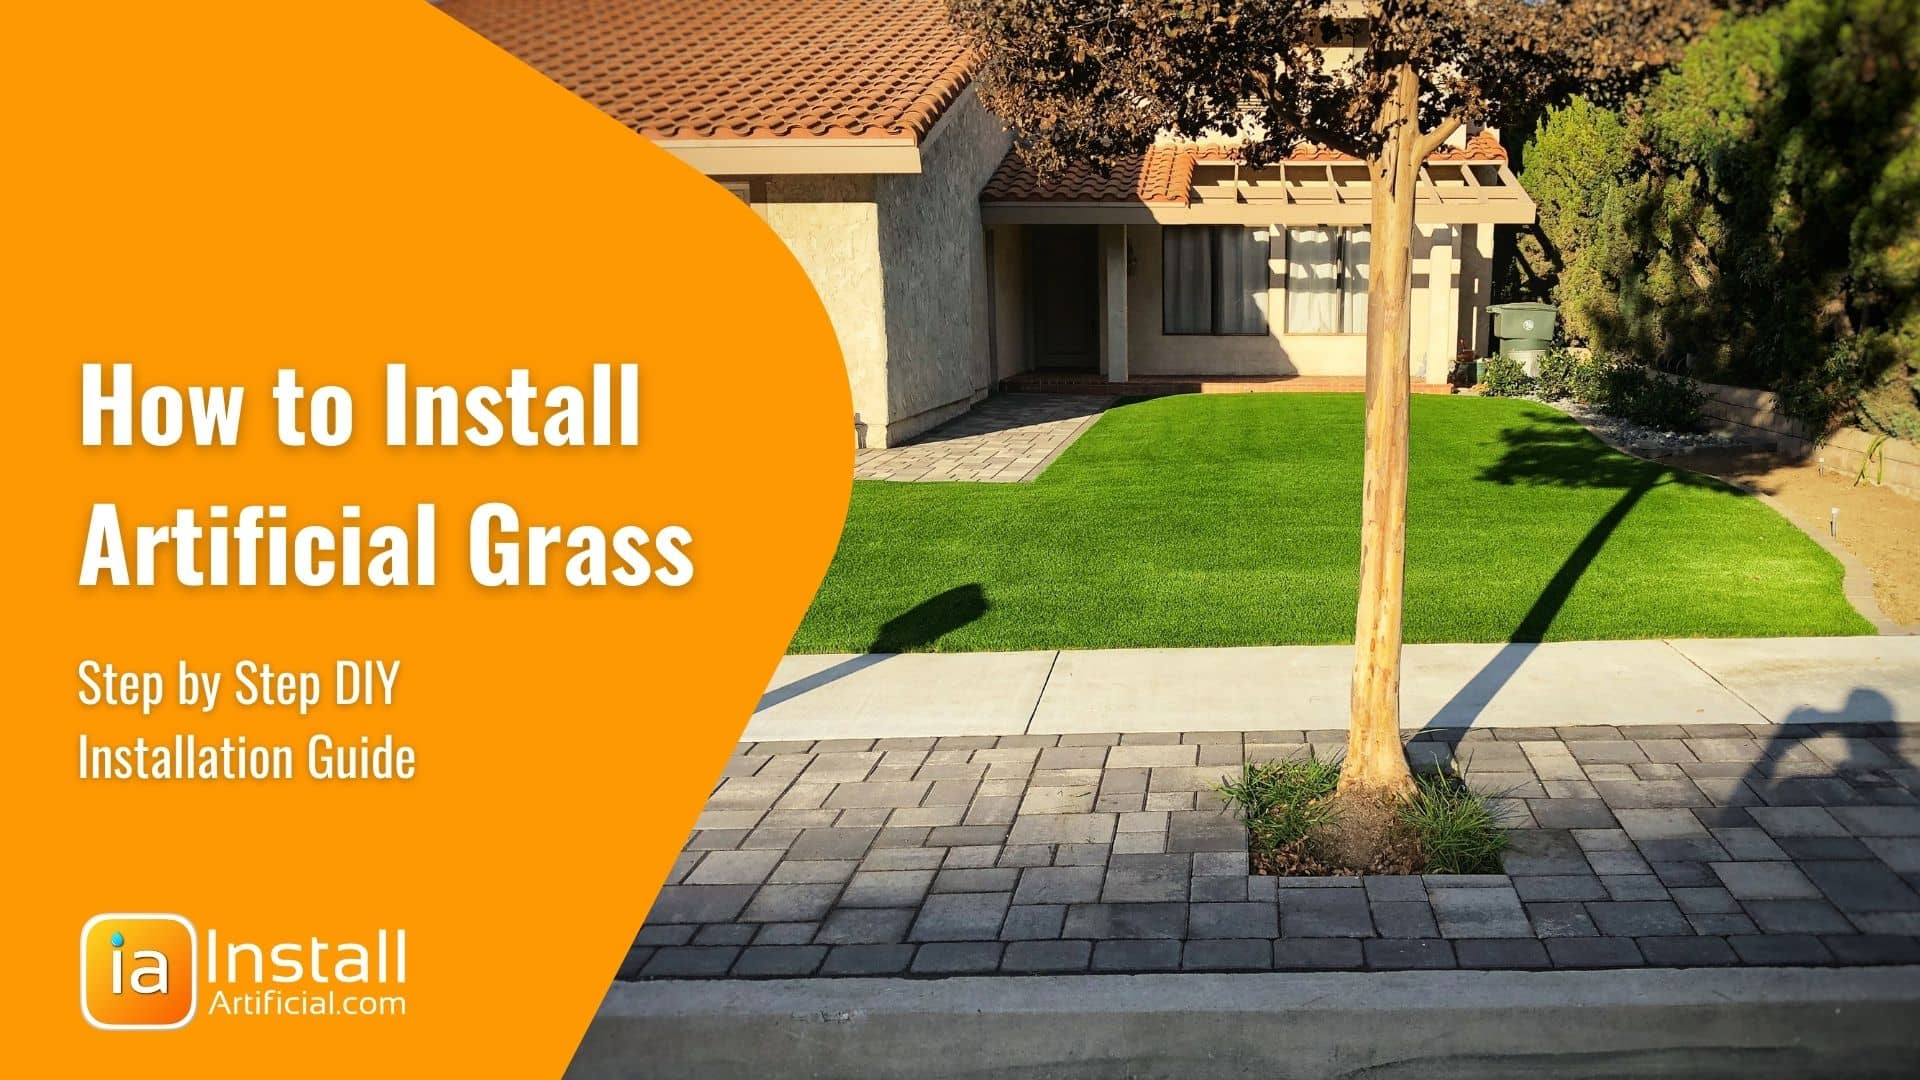 How to Install Artificial Grass - DIY Installation Guide